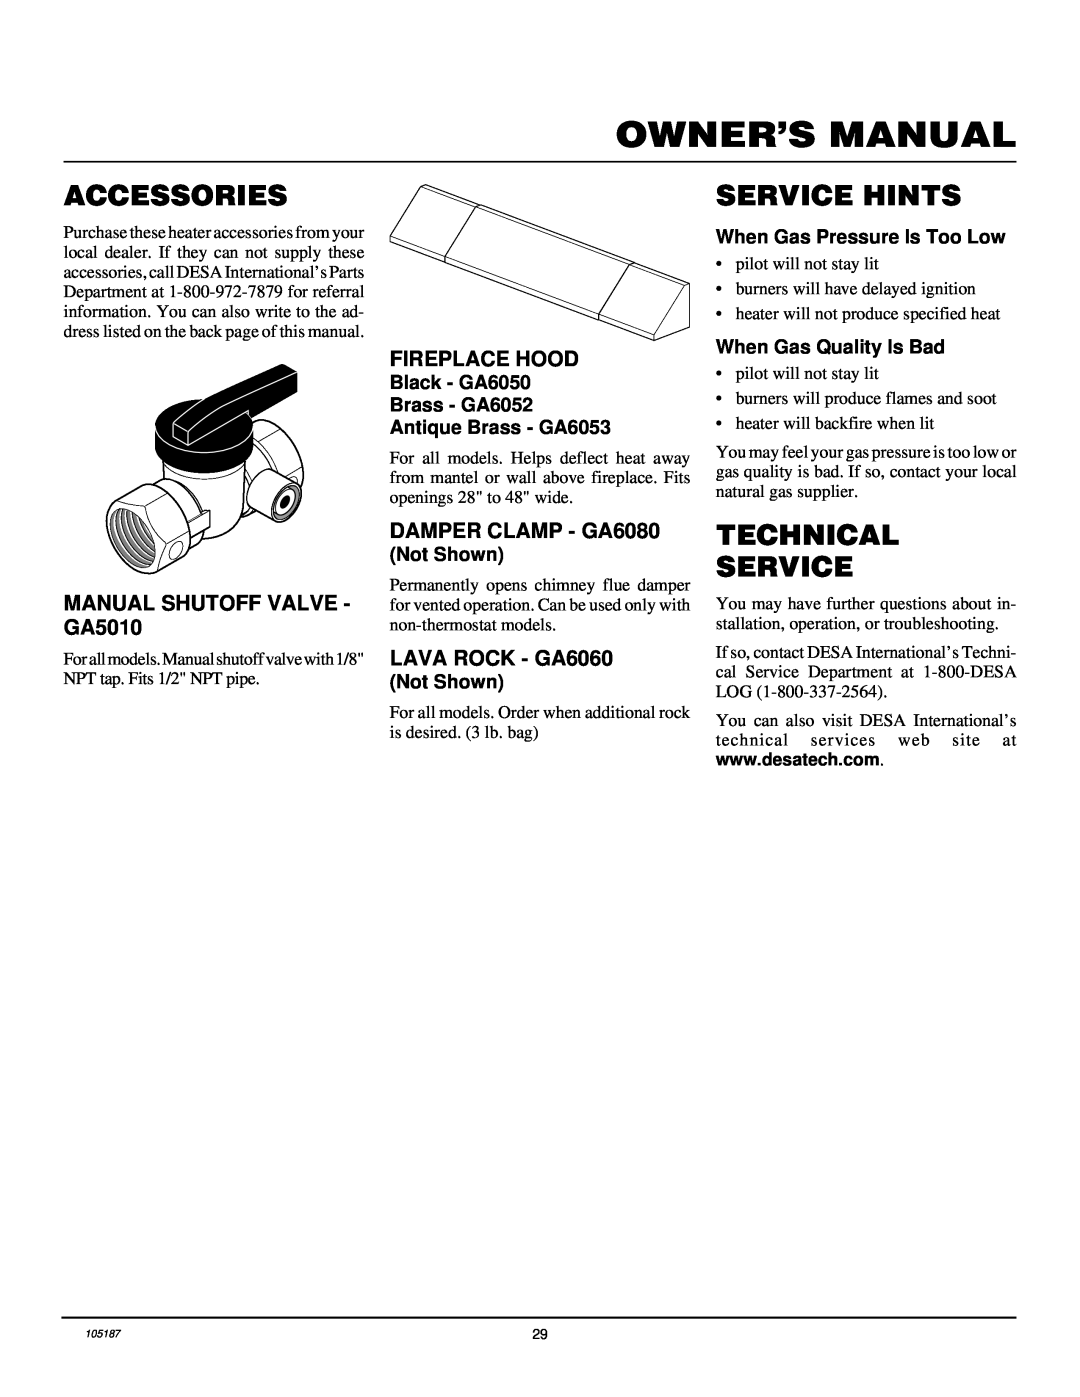 Vanguard Managed Solutions FLAME-MAX Accessories, Service Hints, Technical Service, MANUAL SHUTOFF VALVE - GA5010 